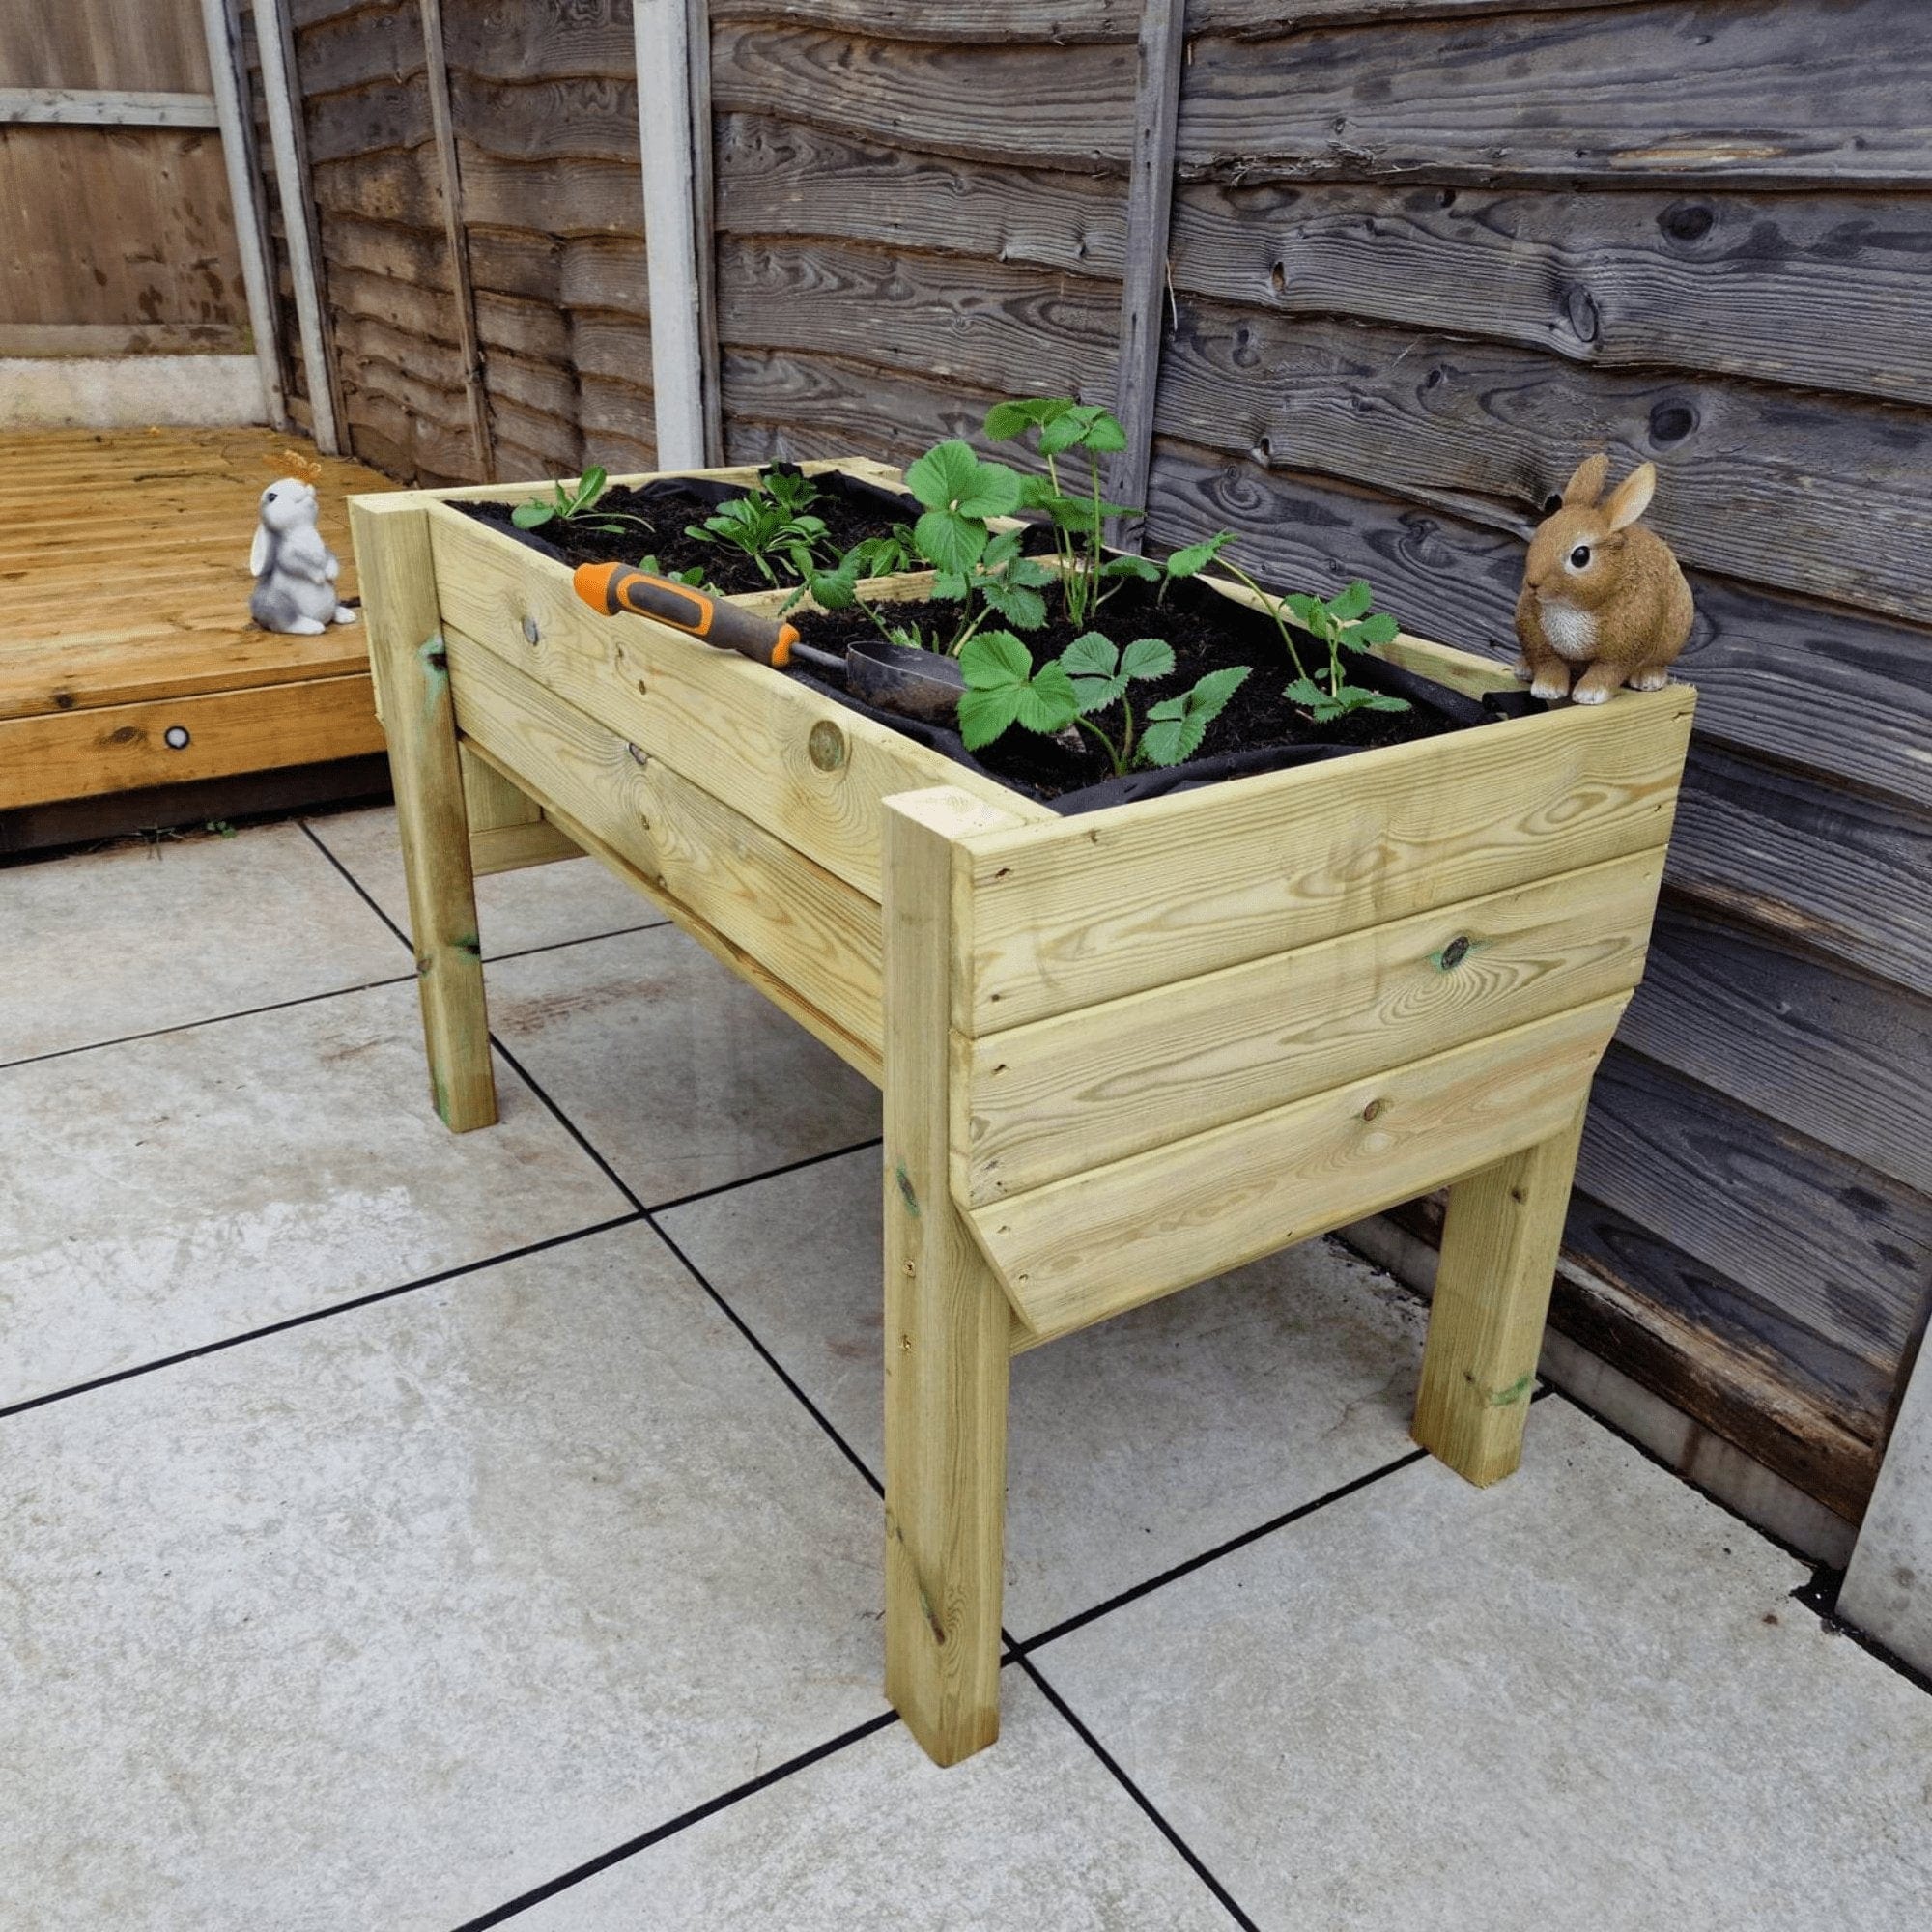 A Veg Trug with a variety of flourishing plants, adding color to a garden.